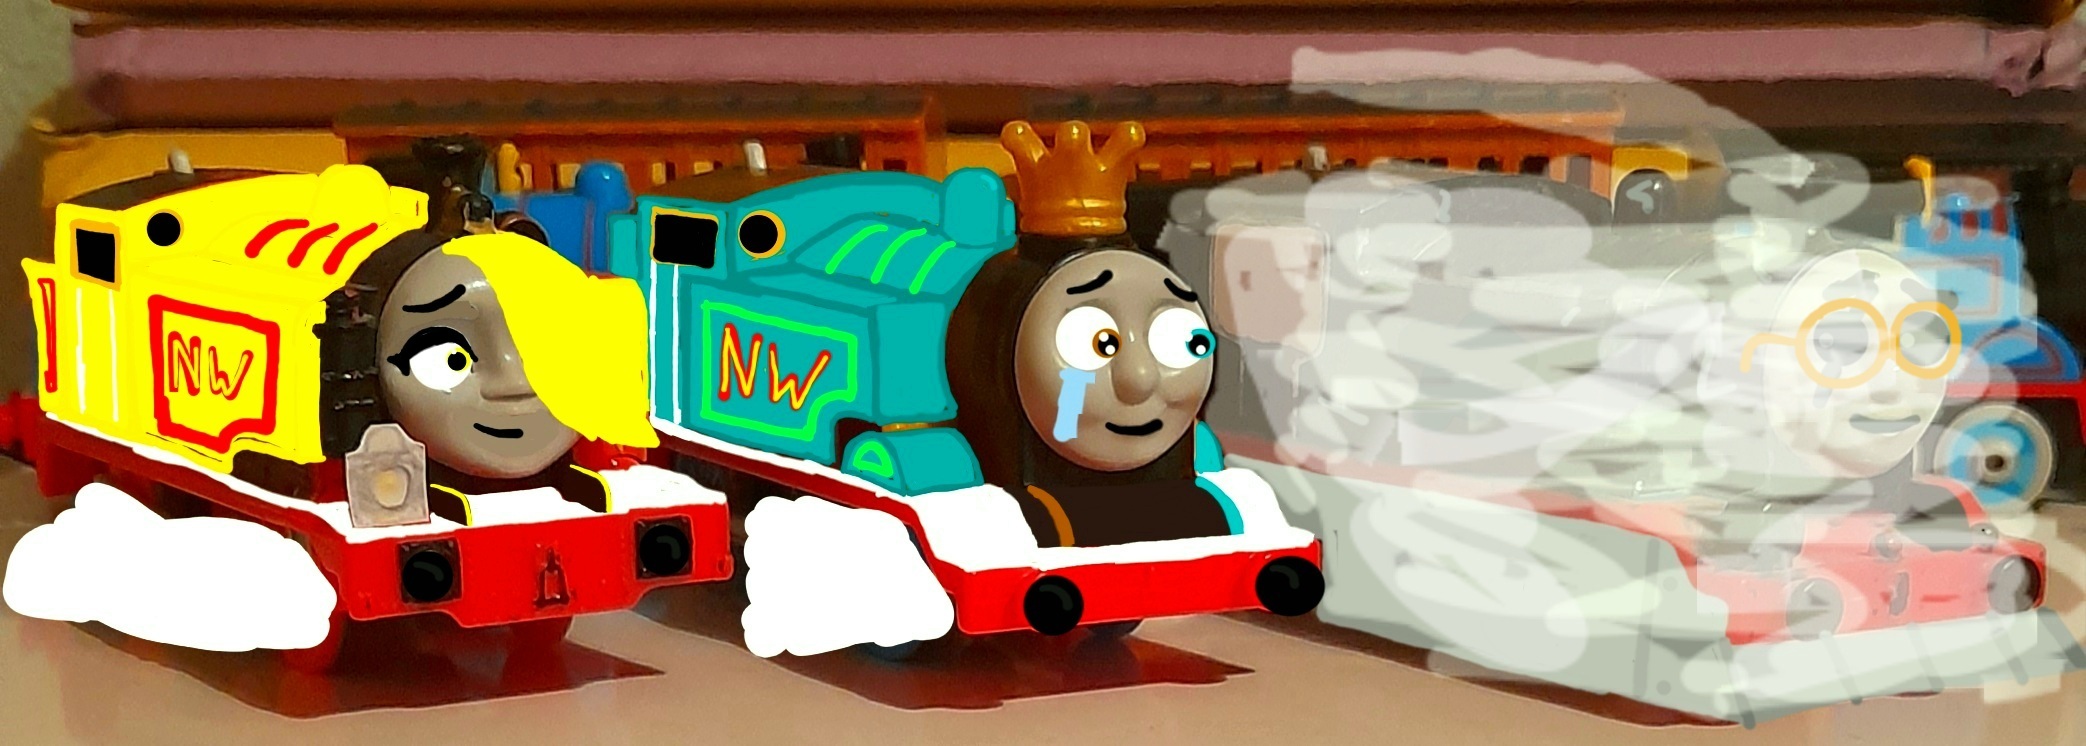 When i first played Thomas the slender engine by Greg3568990 on DeviantArt